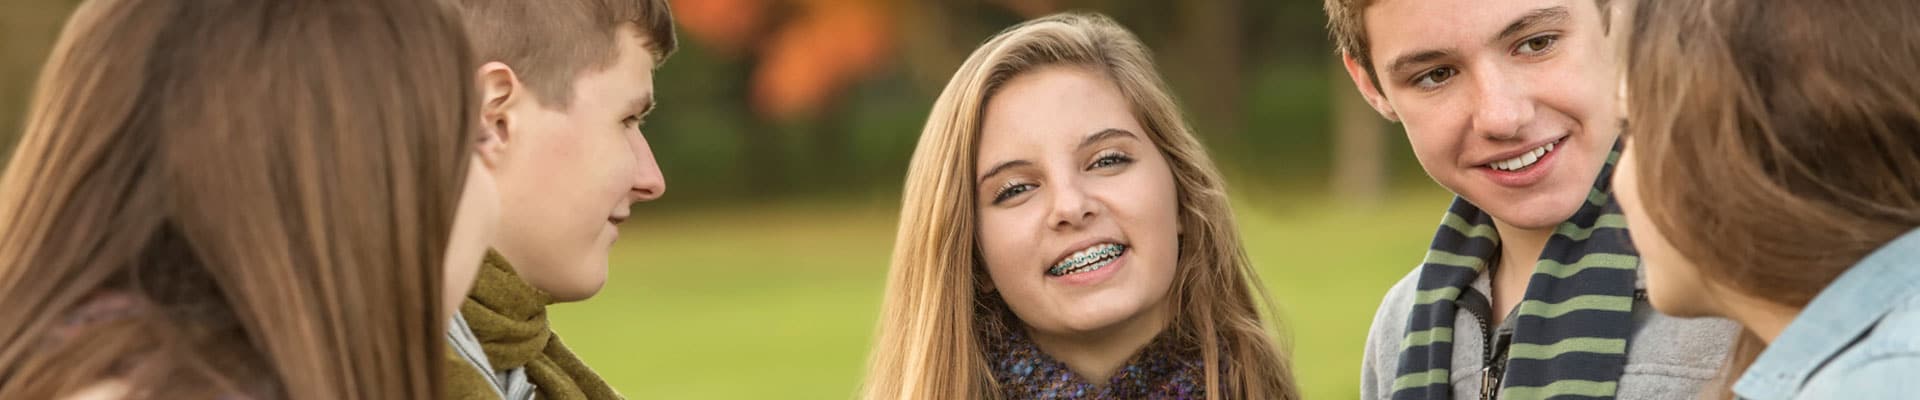 Braces 101 at MK Orthodontics in Waterville and Augusta ME